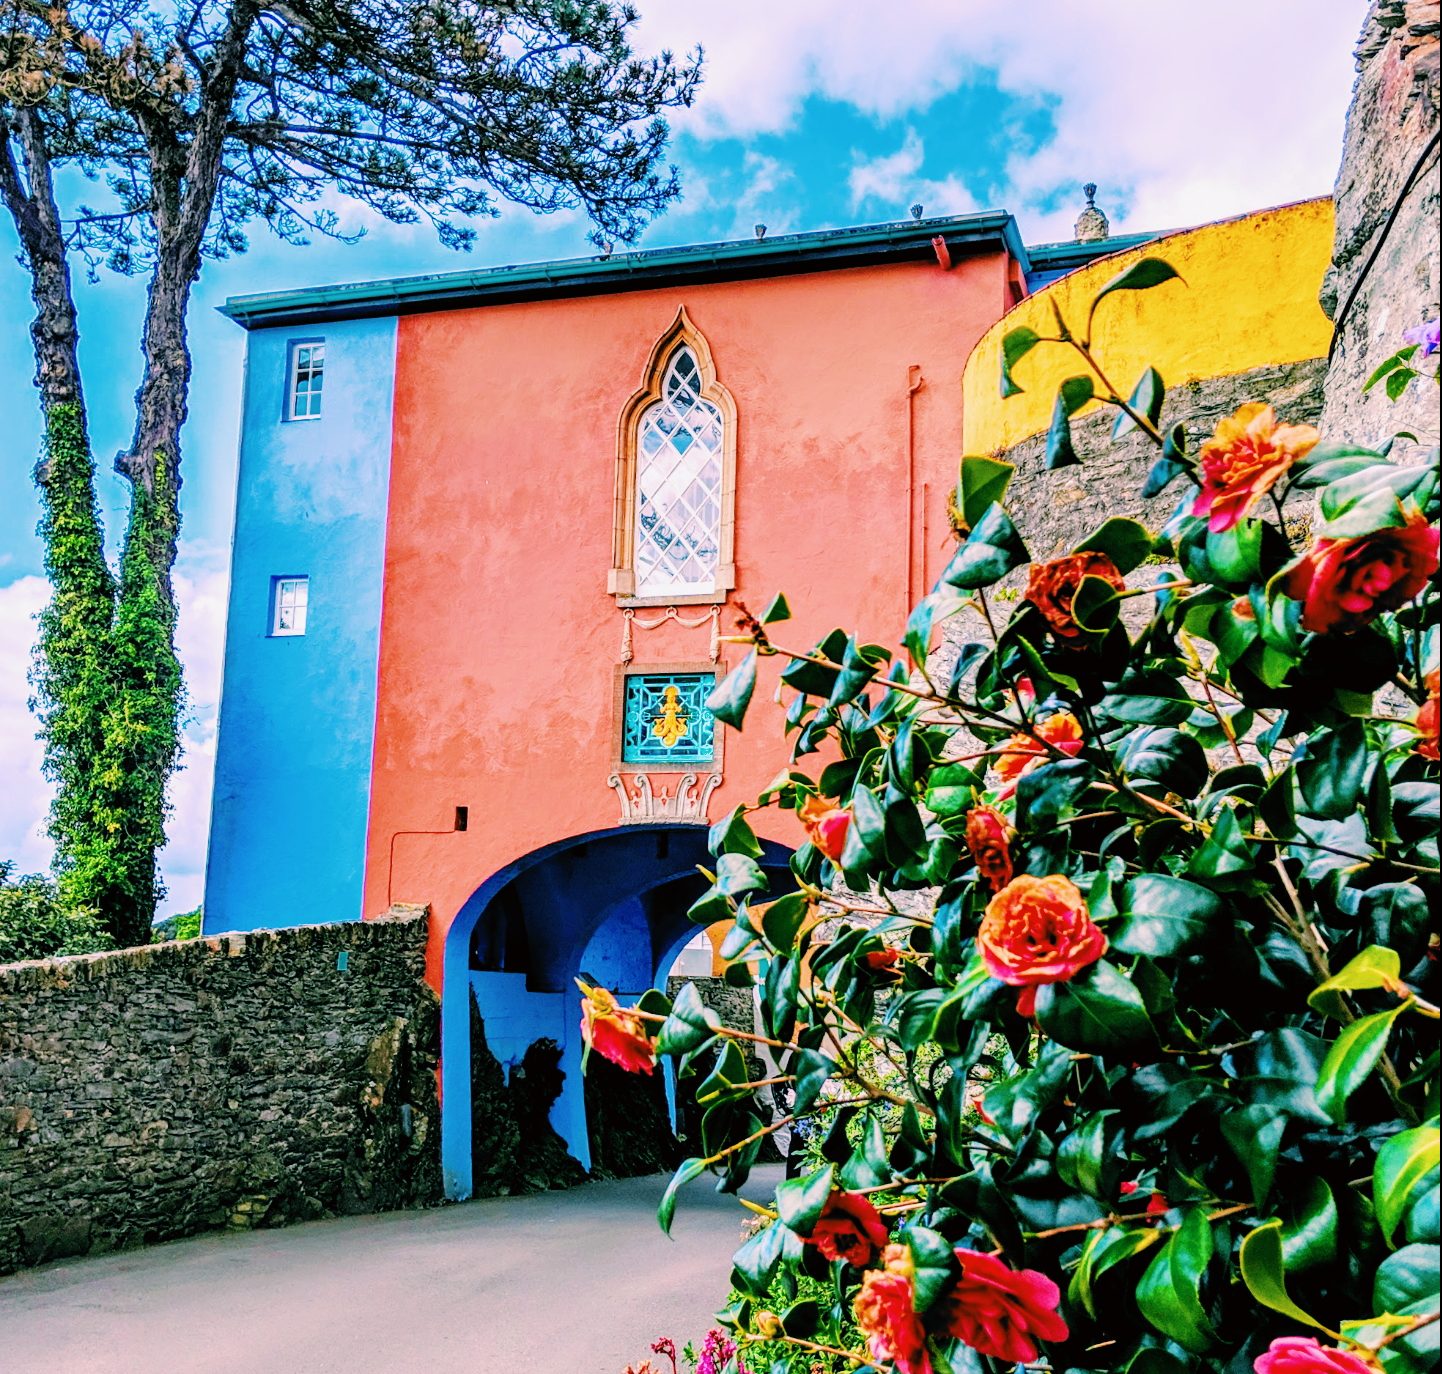 PORTMEIRION: A LITTLE MORE IN LOVE WITH WALES